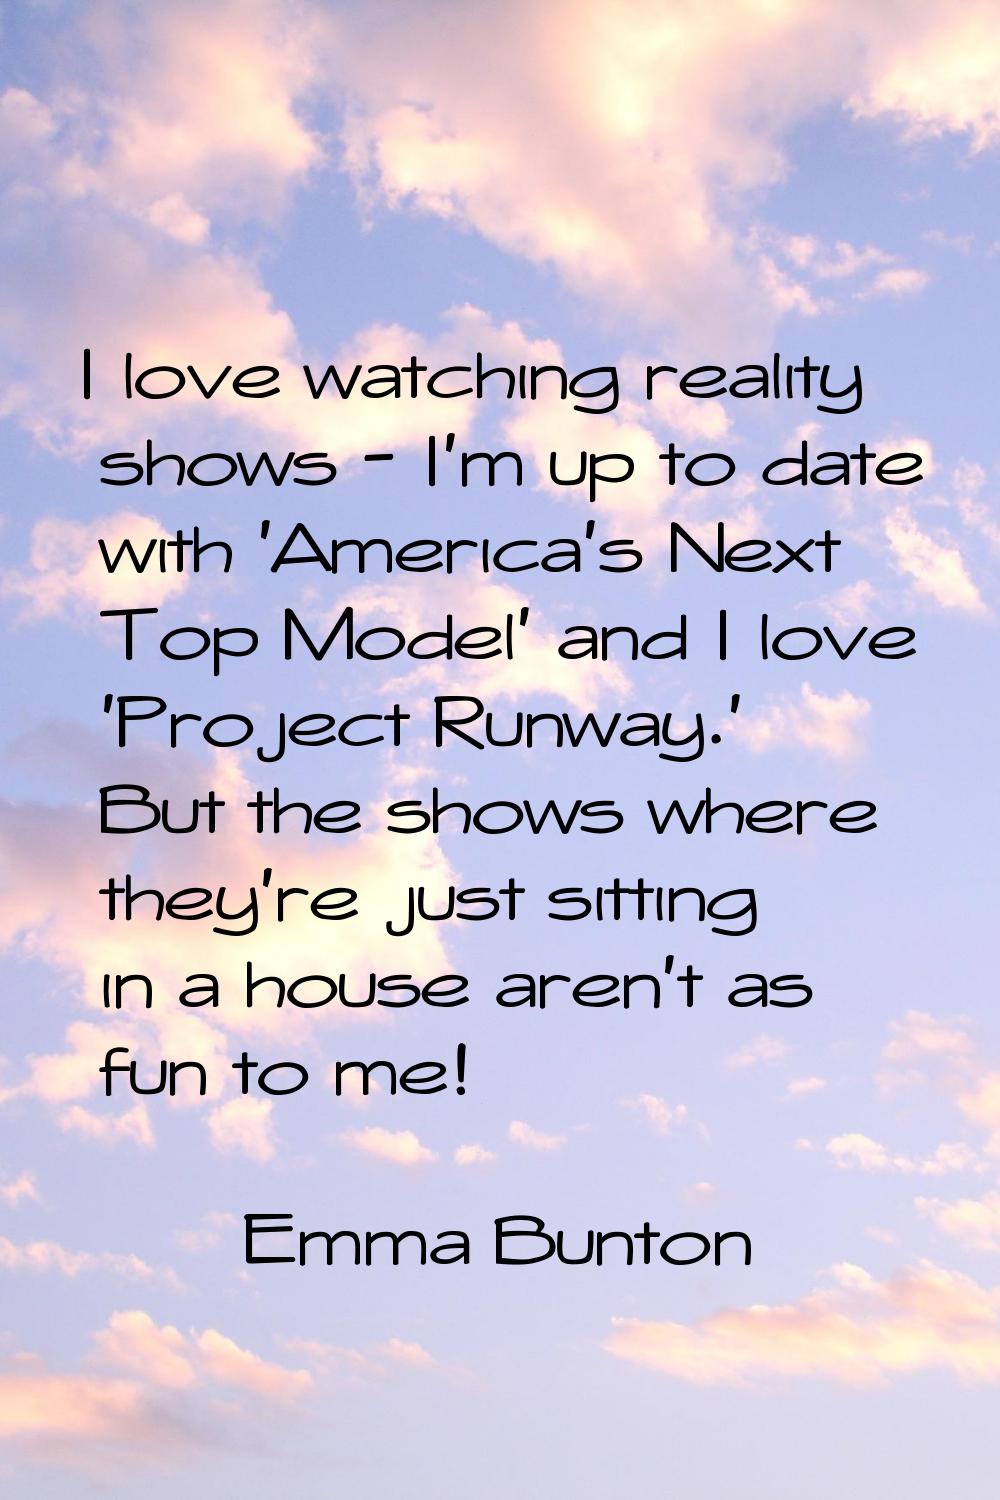 I love watching reality shows - I'm up to date with 'America's Next Top Model' and I love 'Project 